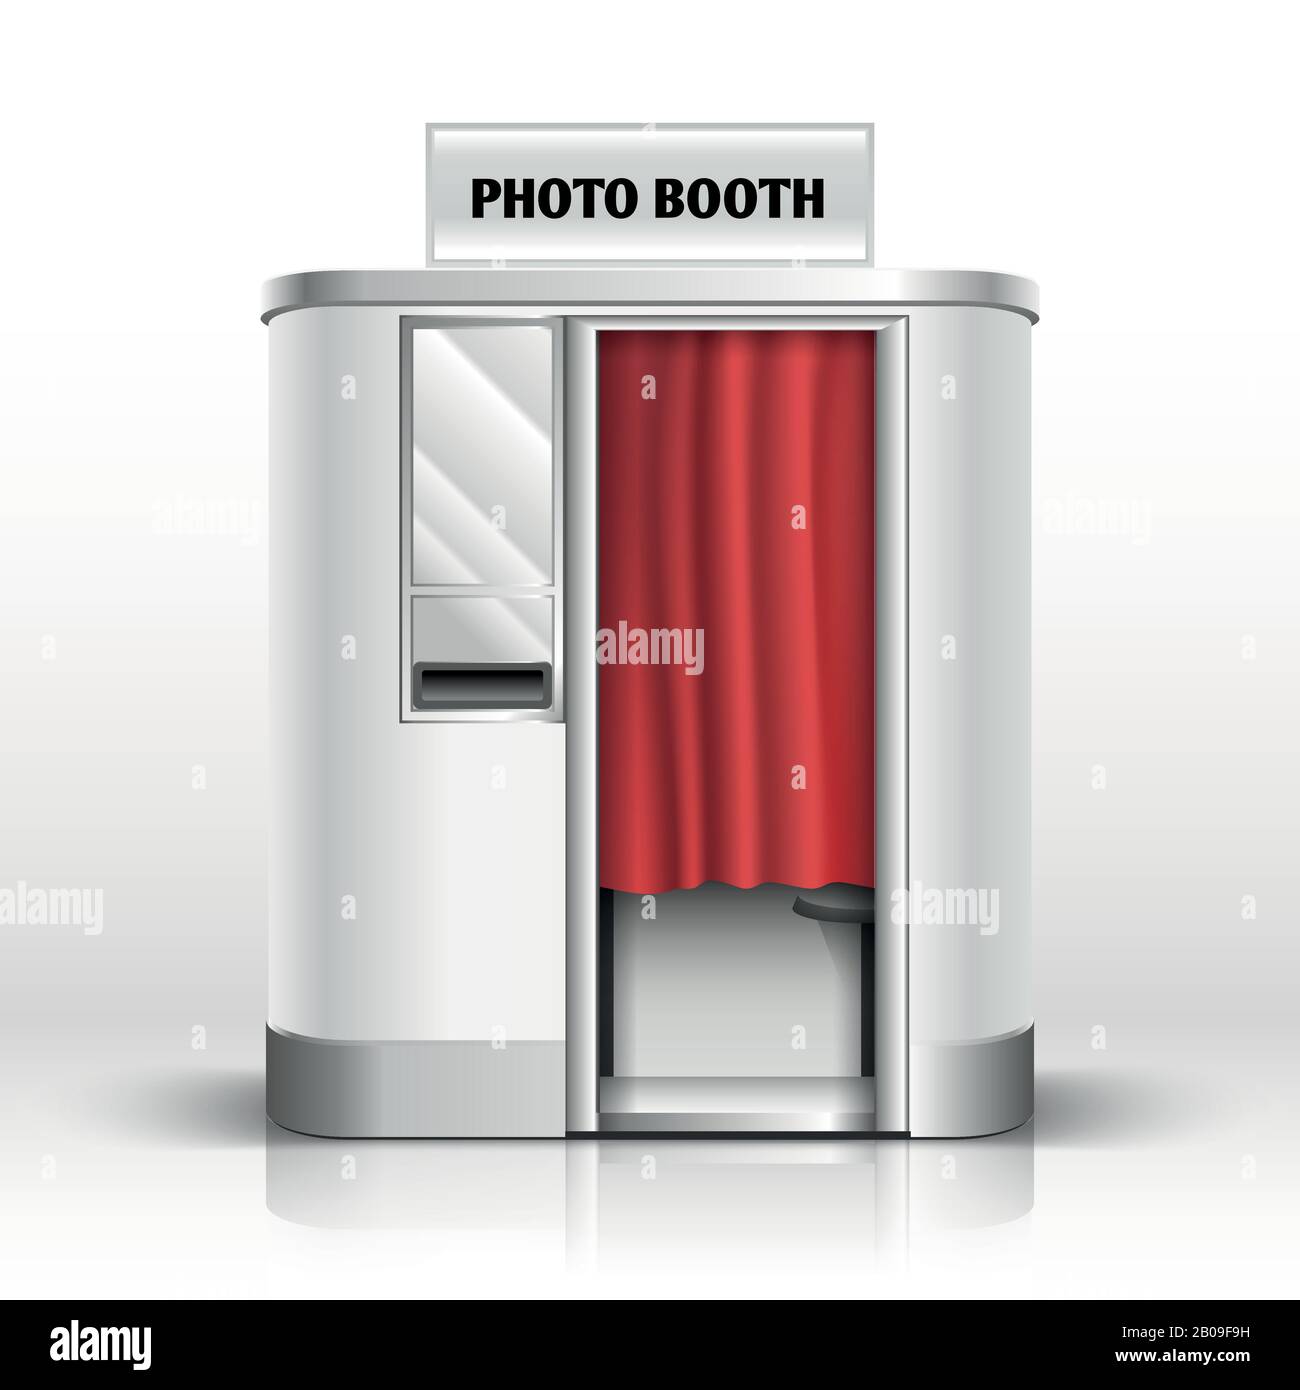 Photo quick service vending machine, photo booth vector illustration. Photo kiosk with red velvet curtain Stock Vector